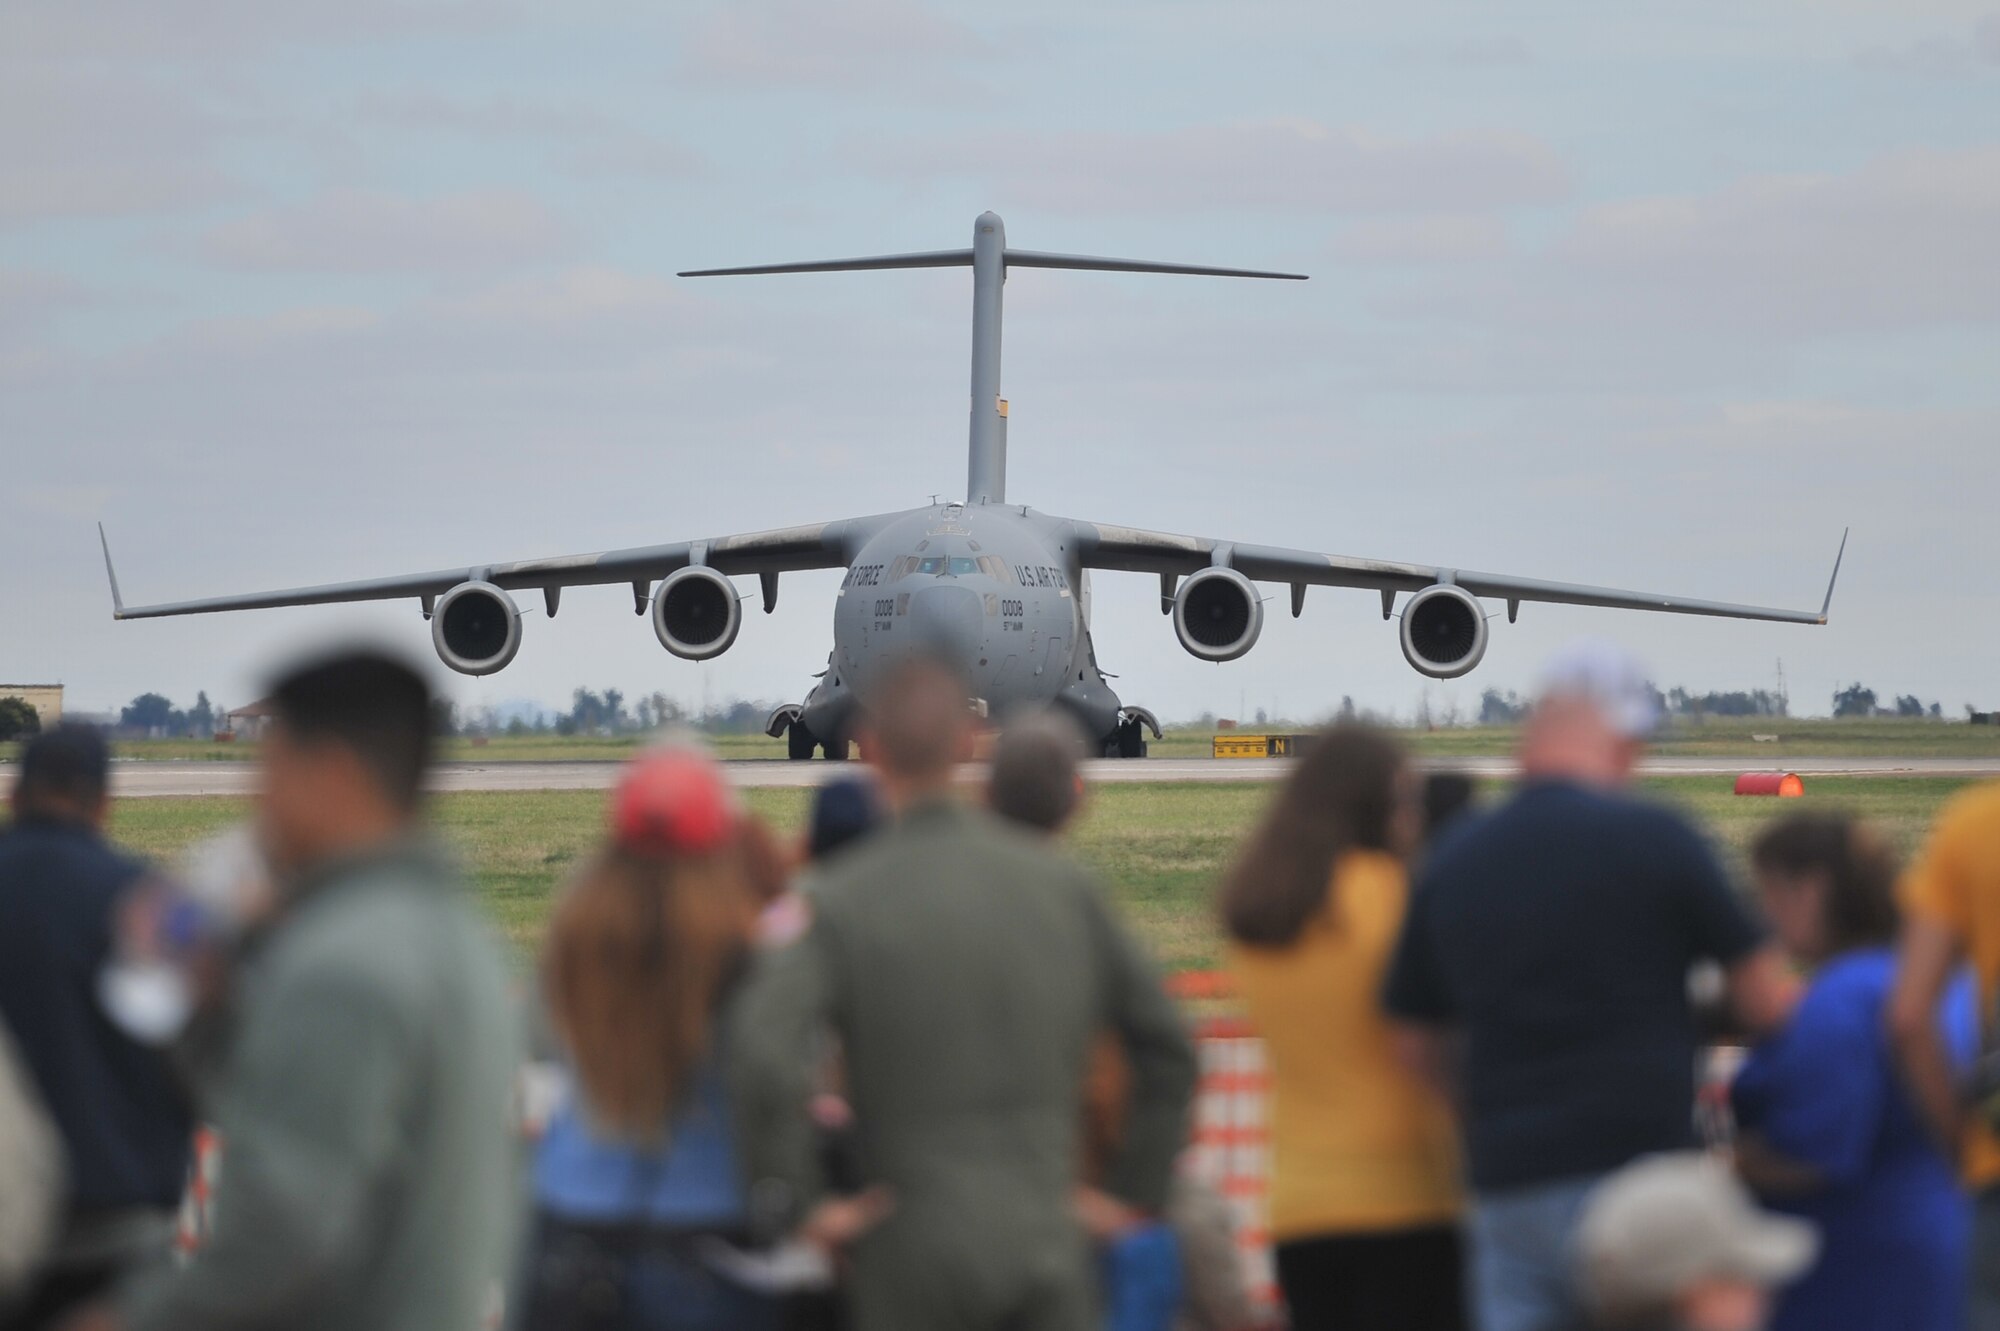 ALTUS AIR FORCE BASE, Okla. – Visitors watch as a U.S. C-17 Globemaster III from Altus Air Force Base taxis back to the aircraft ramp during the 2014 Wings of Freedom Open House, Sept. 13, 2014. The C-17 is assigned to the 58th Airlift Squadron and performed a live aerial refueling demonstration for spectators at this year’s open house. (U.S. Air Force photo by Senior Airman Dillon Davis/Released)